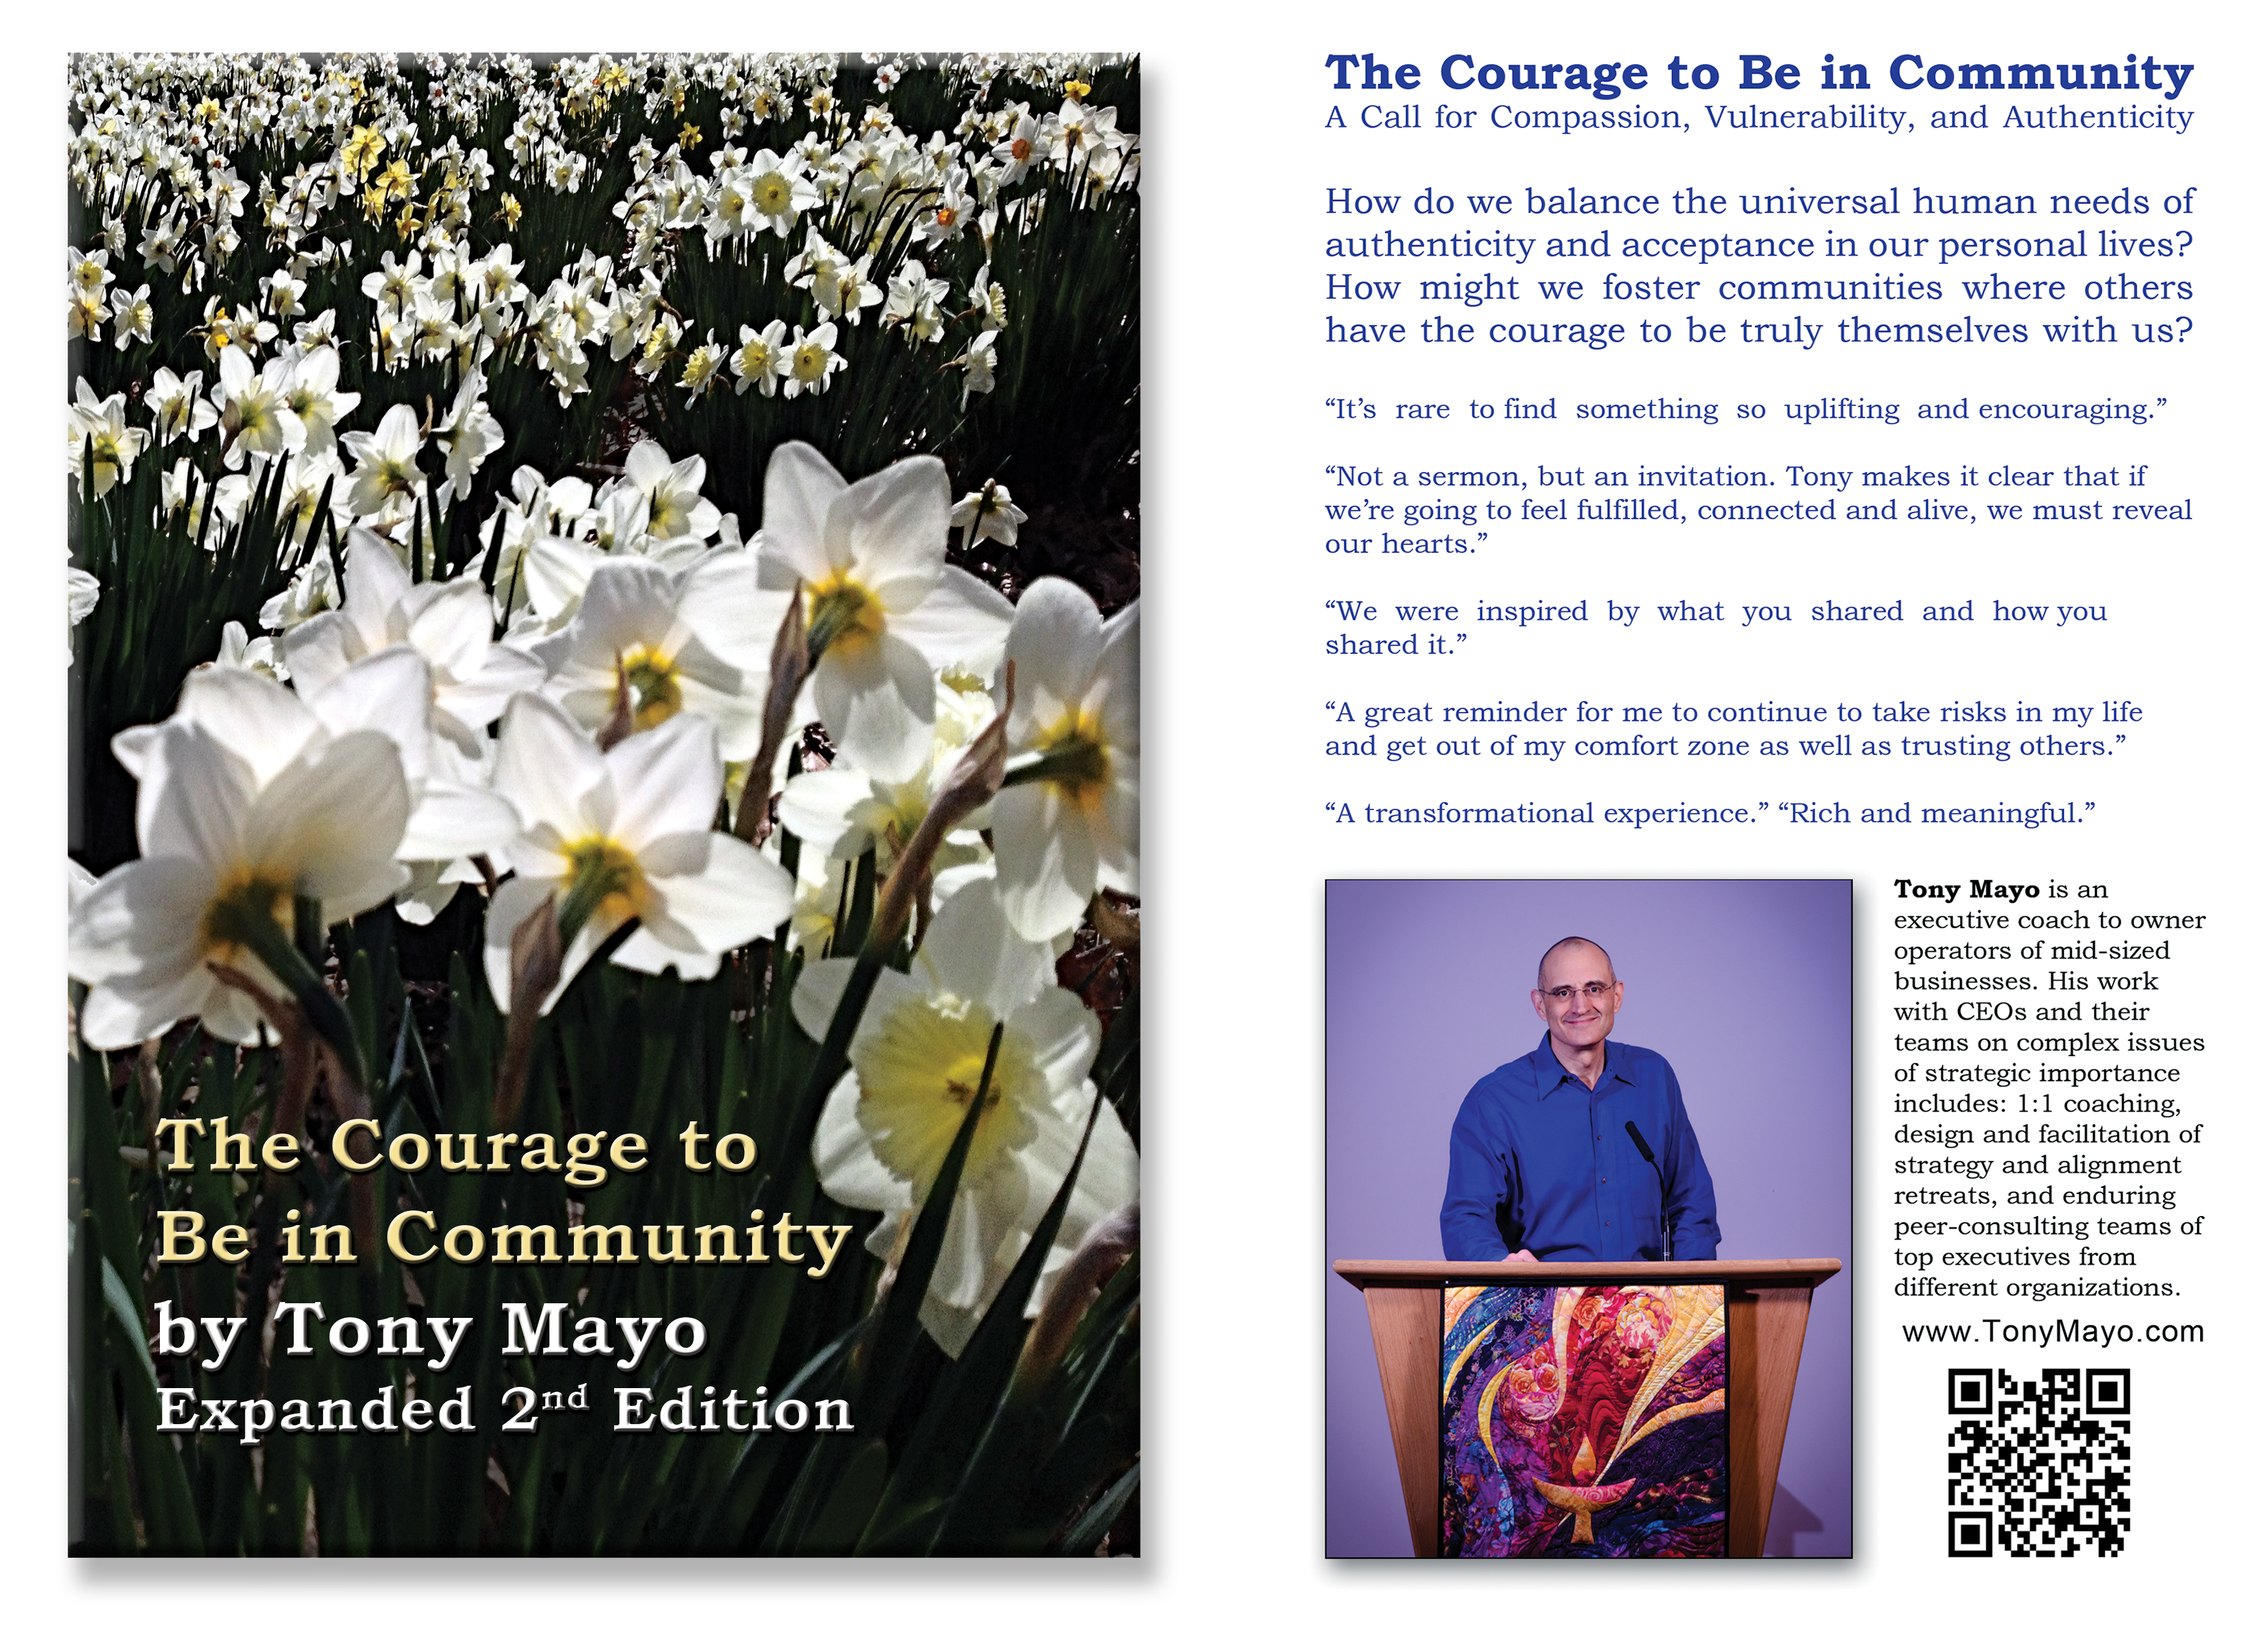 The Courage to Be in Community Expanded 2nd Edition